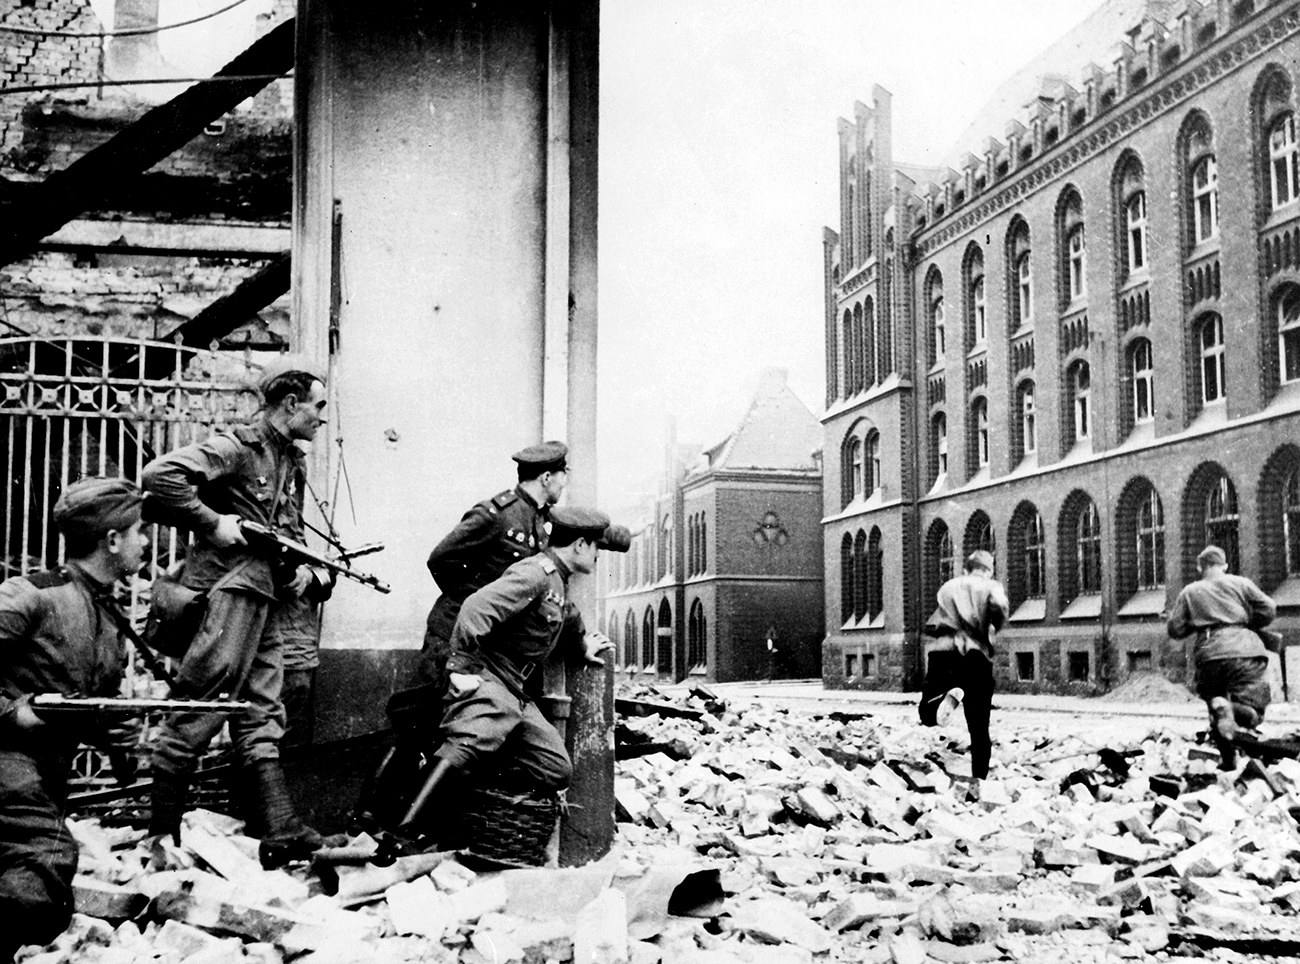 The Red Army in the streets of Berlin, April 1945.